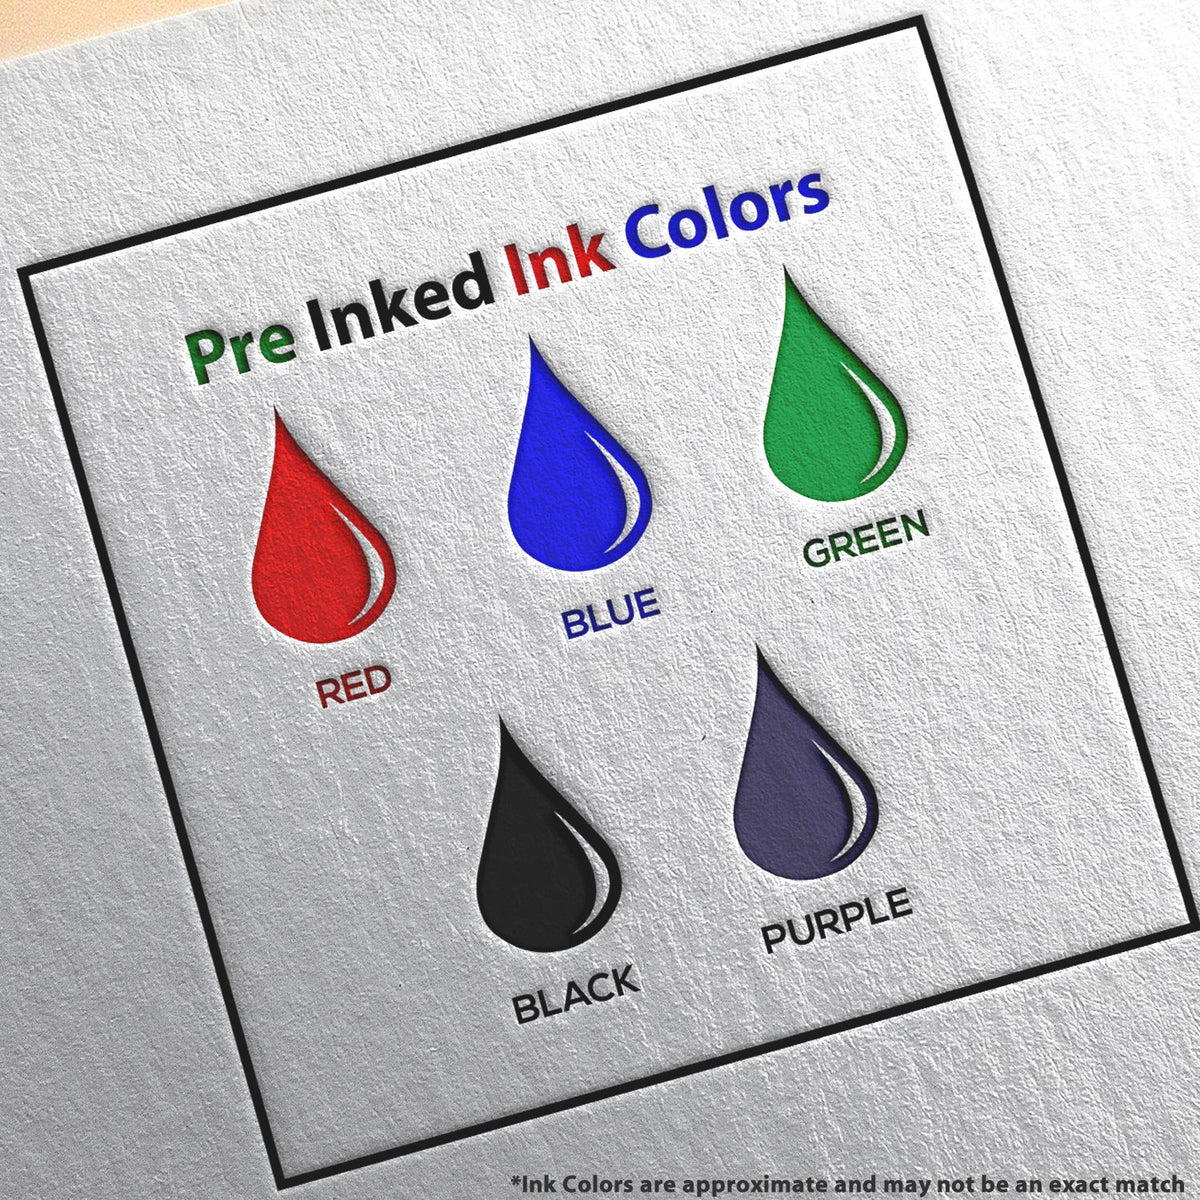 A picture showing the different ink colors or hues available for the Super Slim Kentucky Notary Public Stamp product.